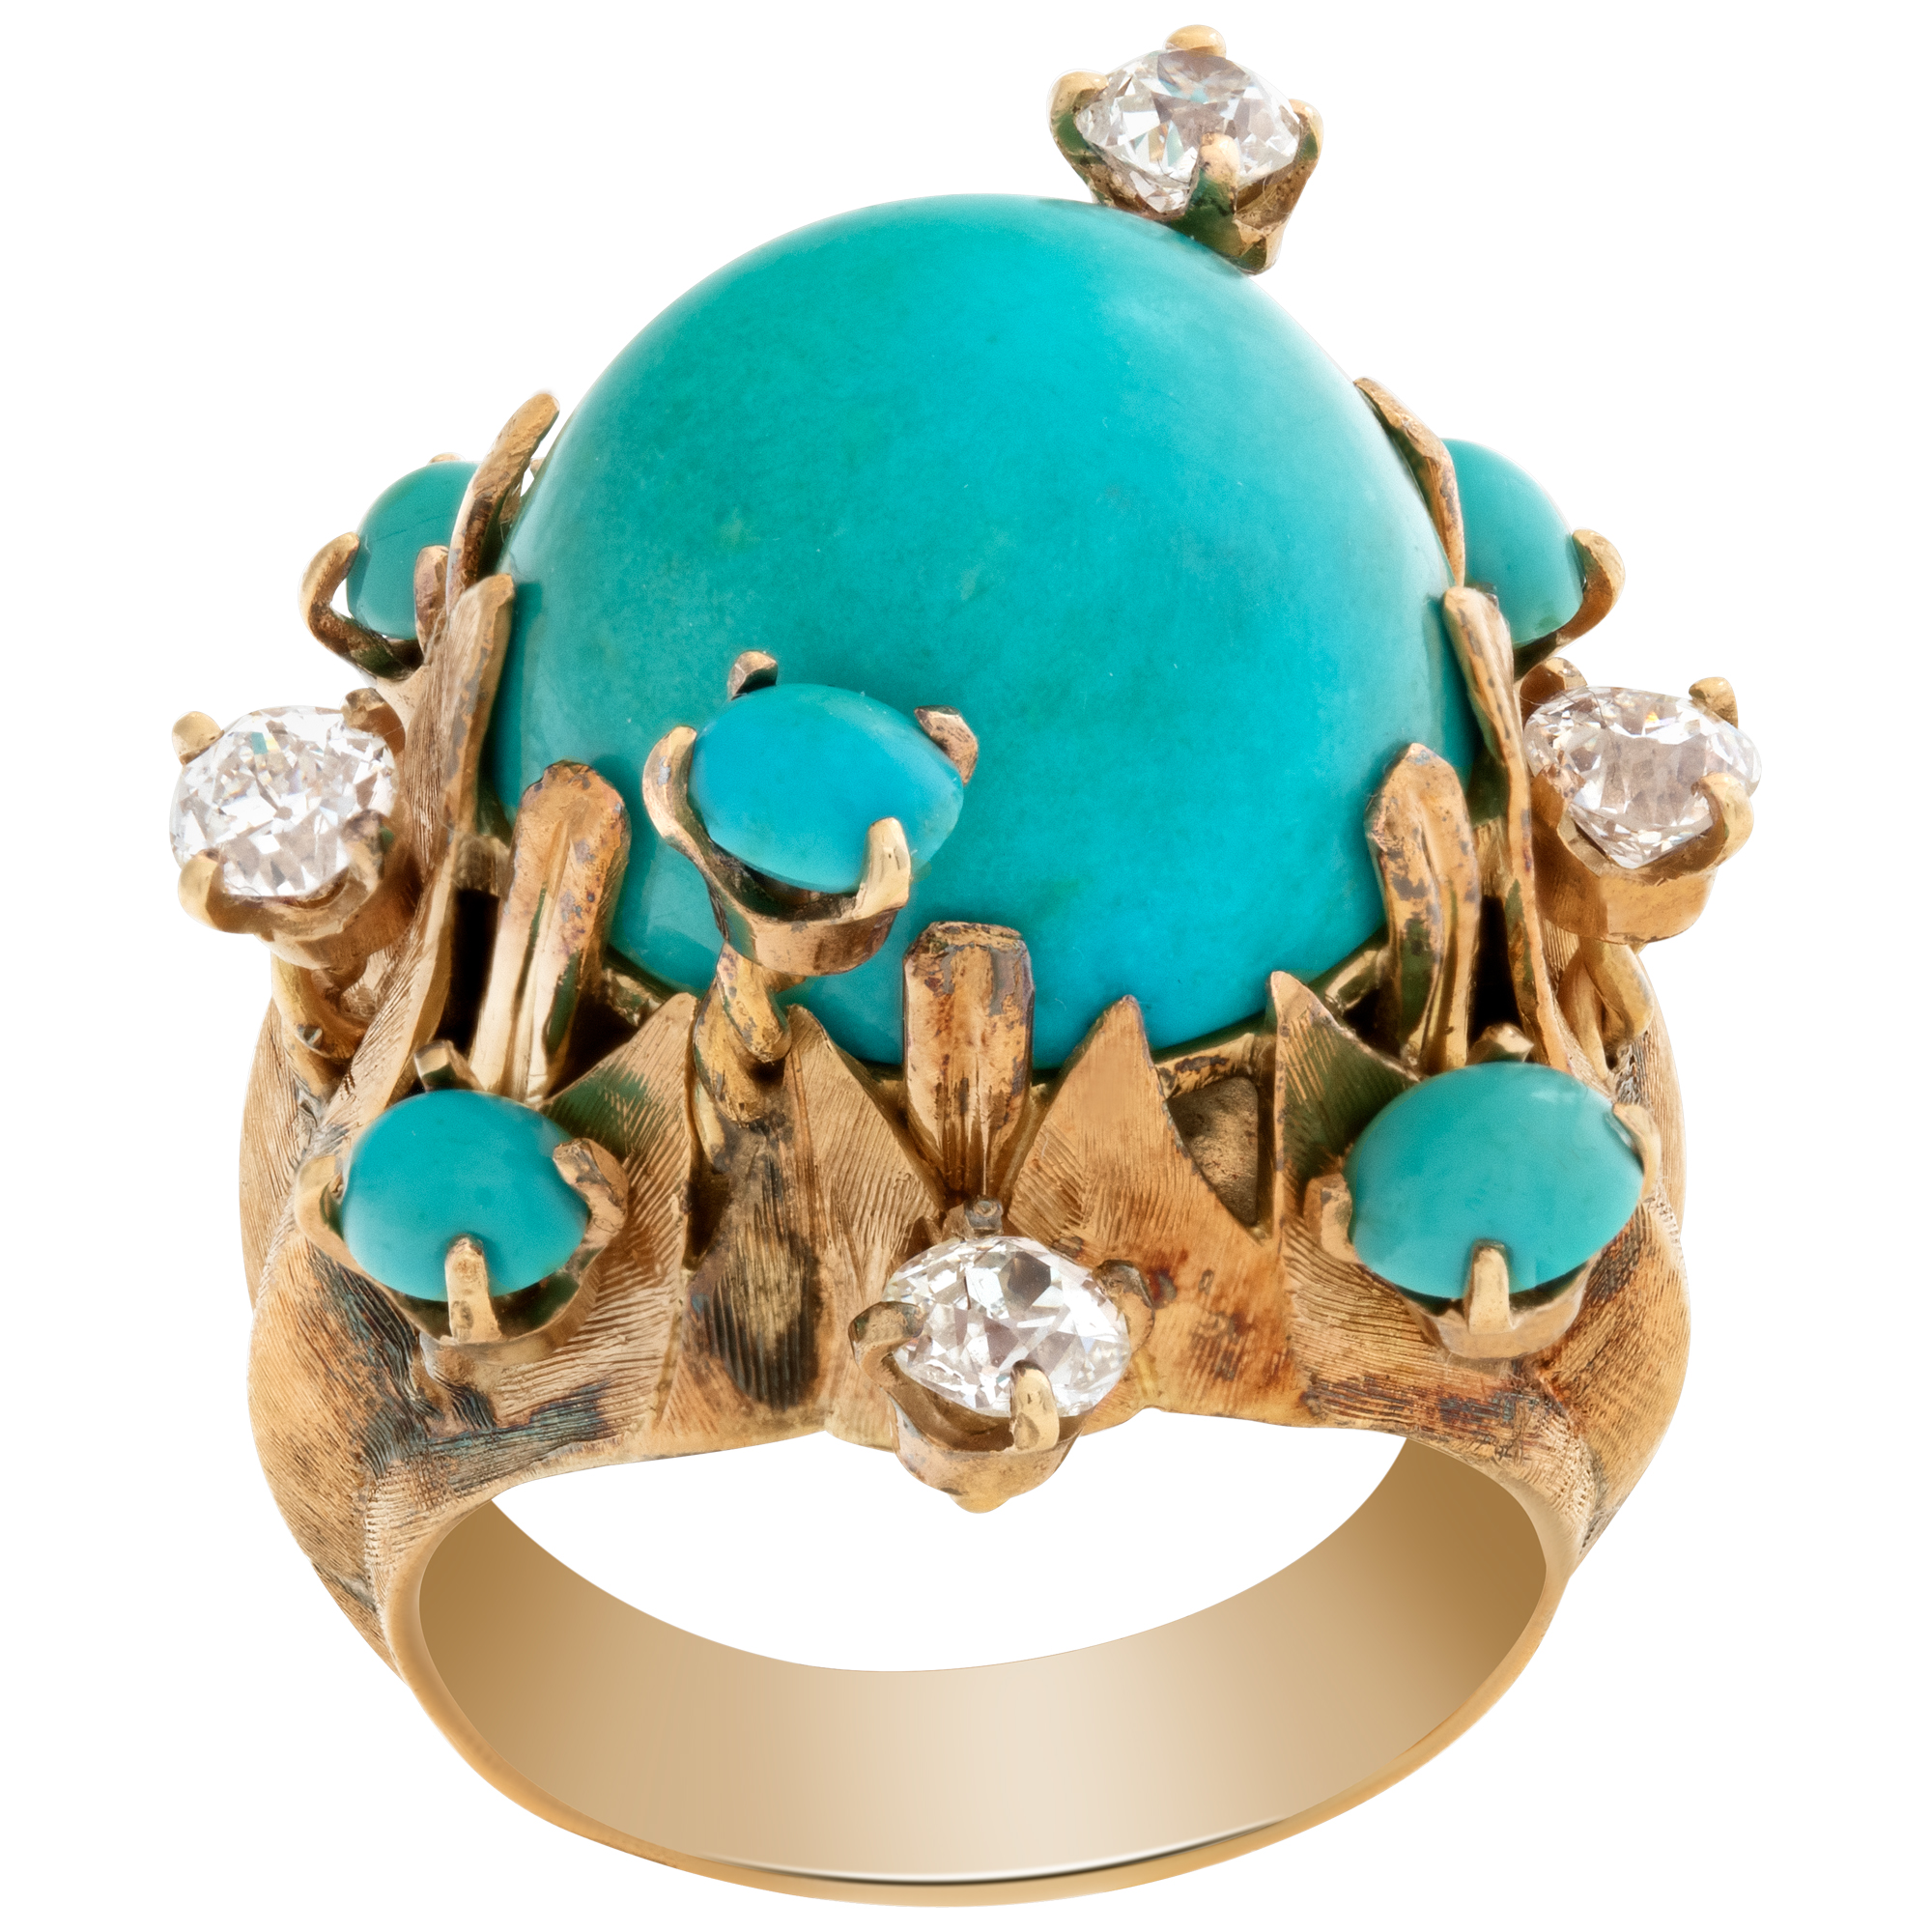 Cabochon Turquoise ring with round brilliant cut diamonds set in 18k image 1